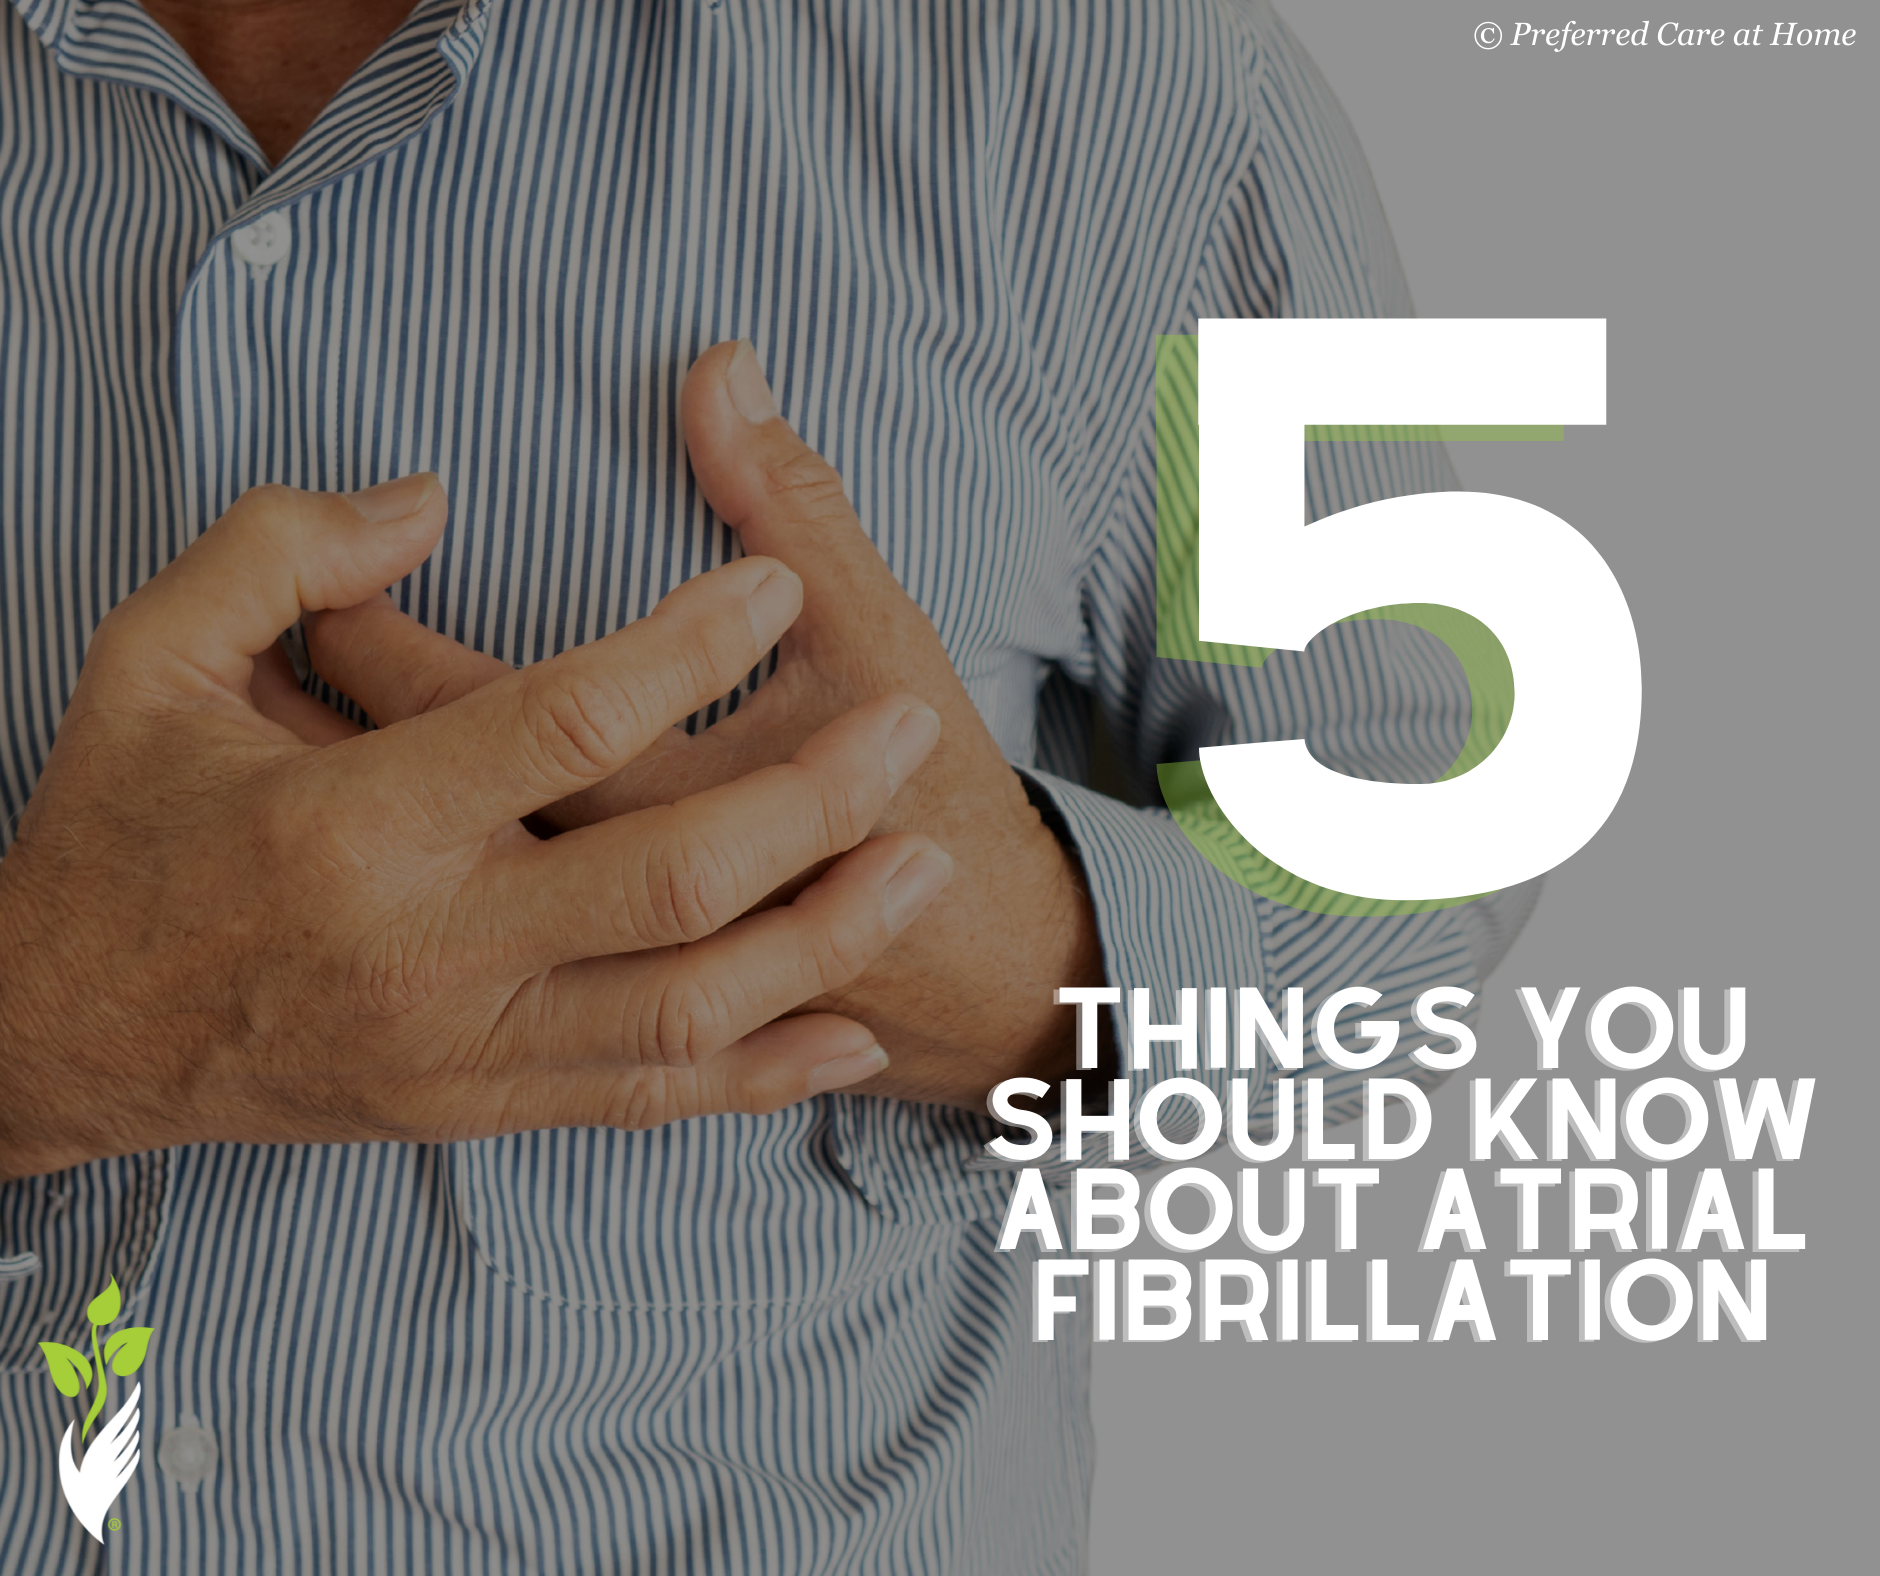 Atrial Fibrillation: 5 Things You Should Know